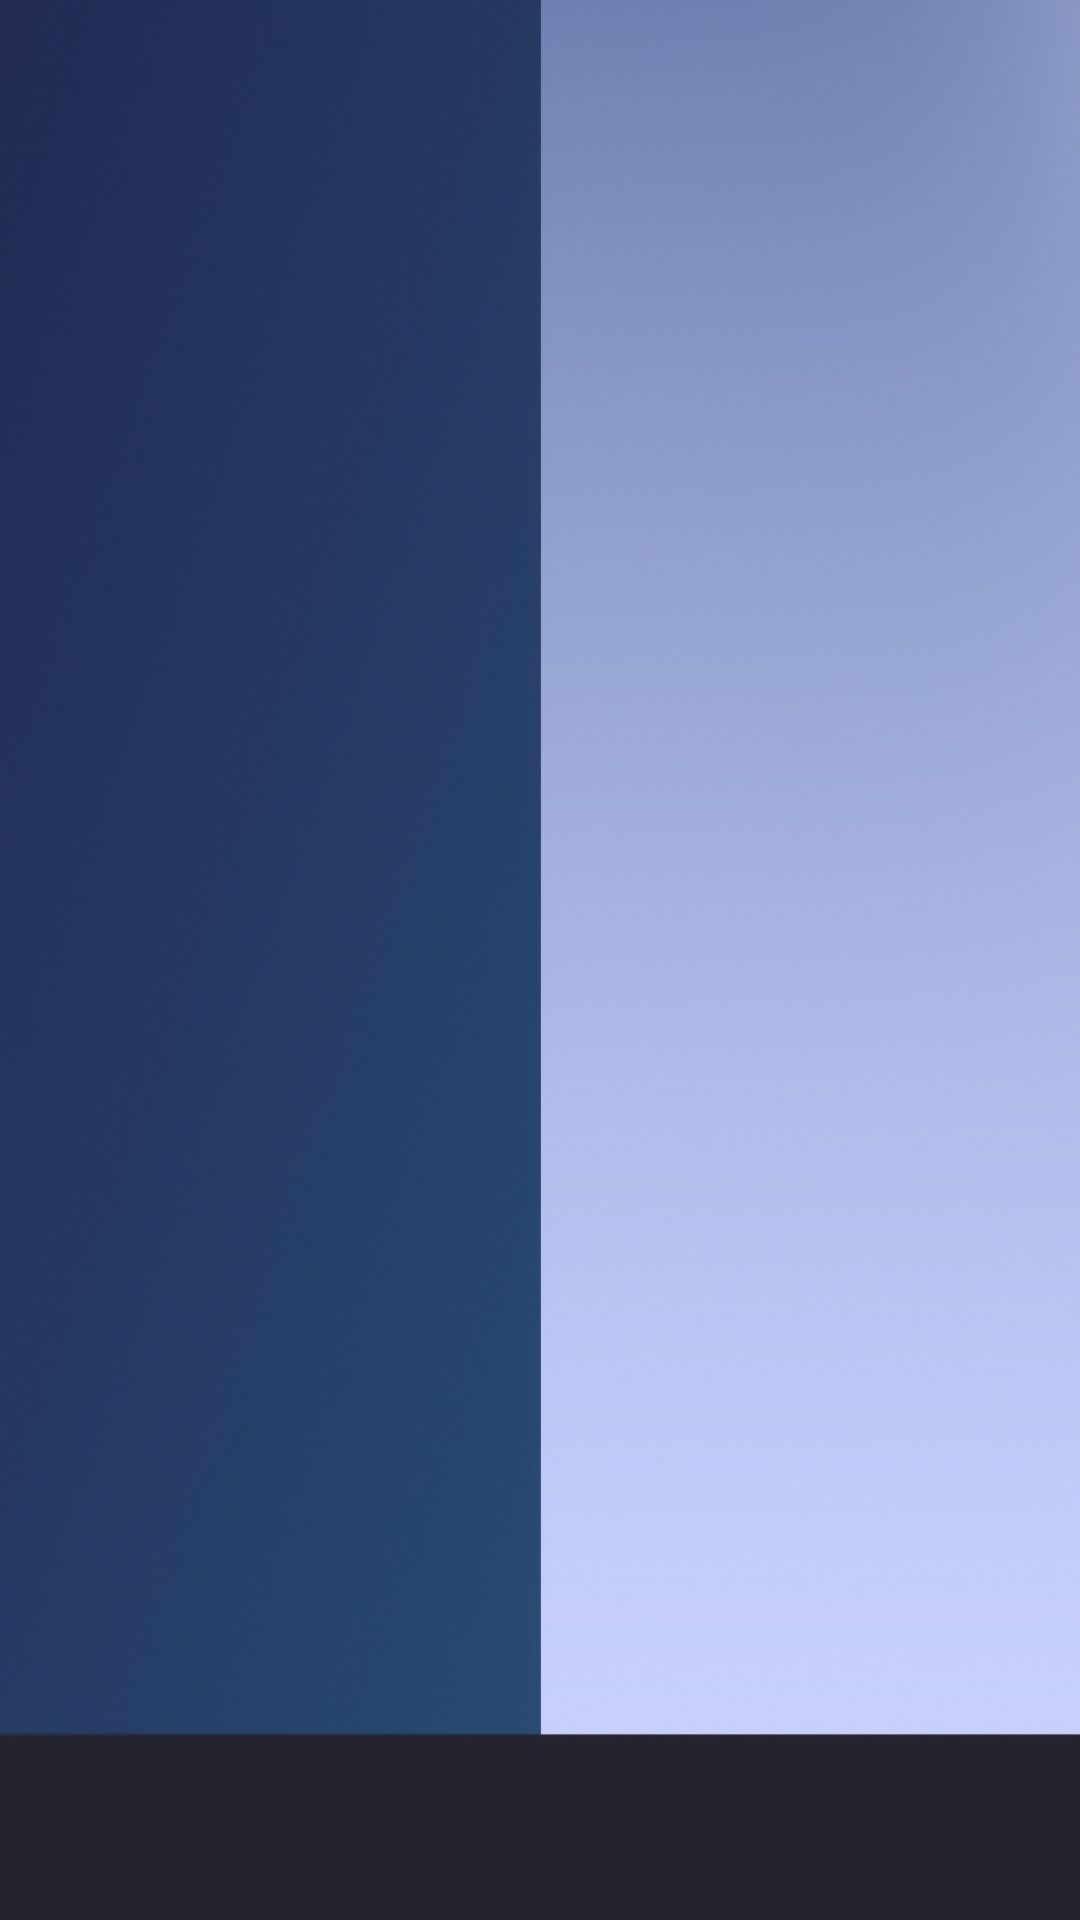 Two Color Images